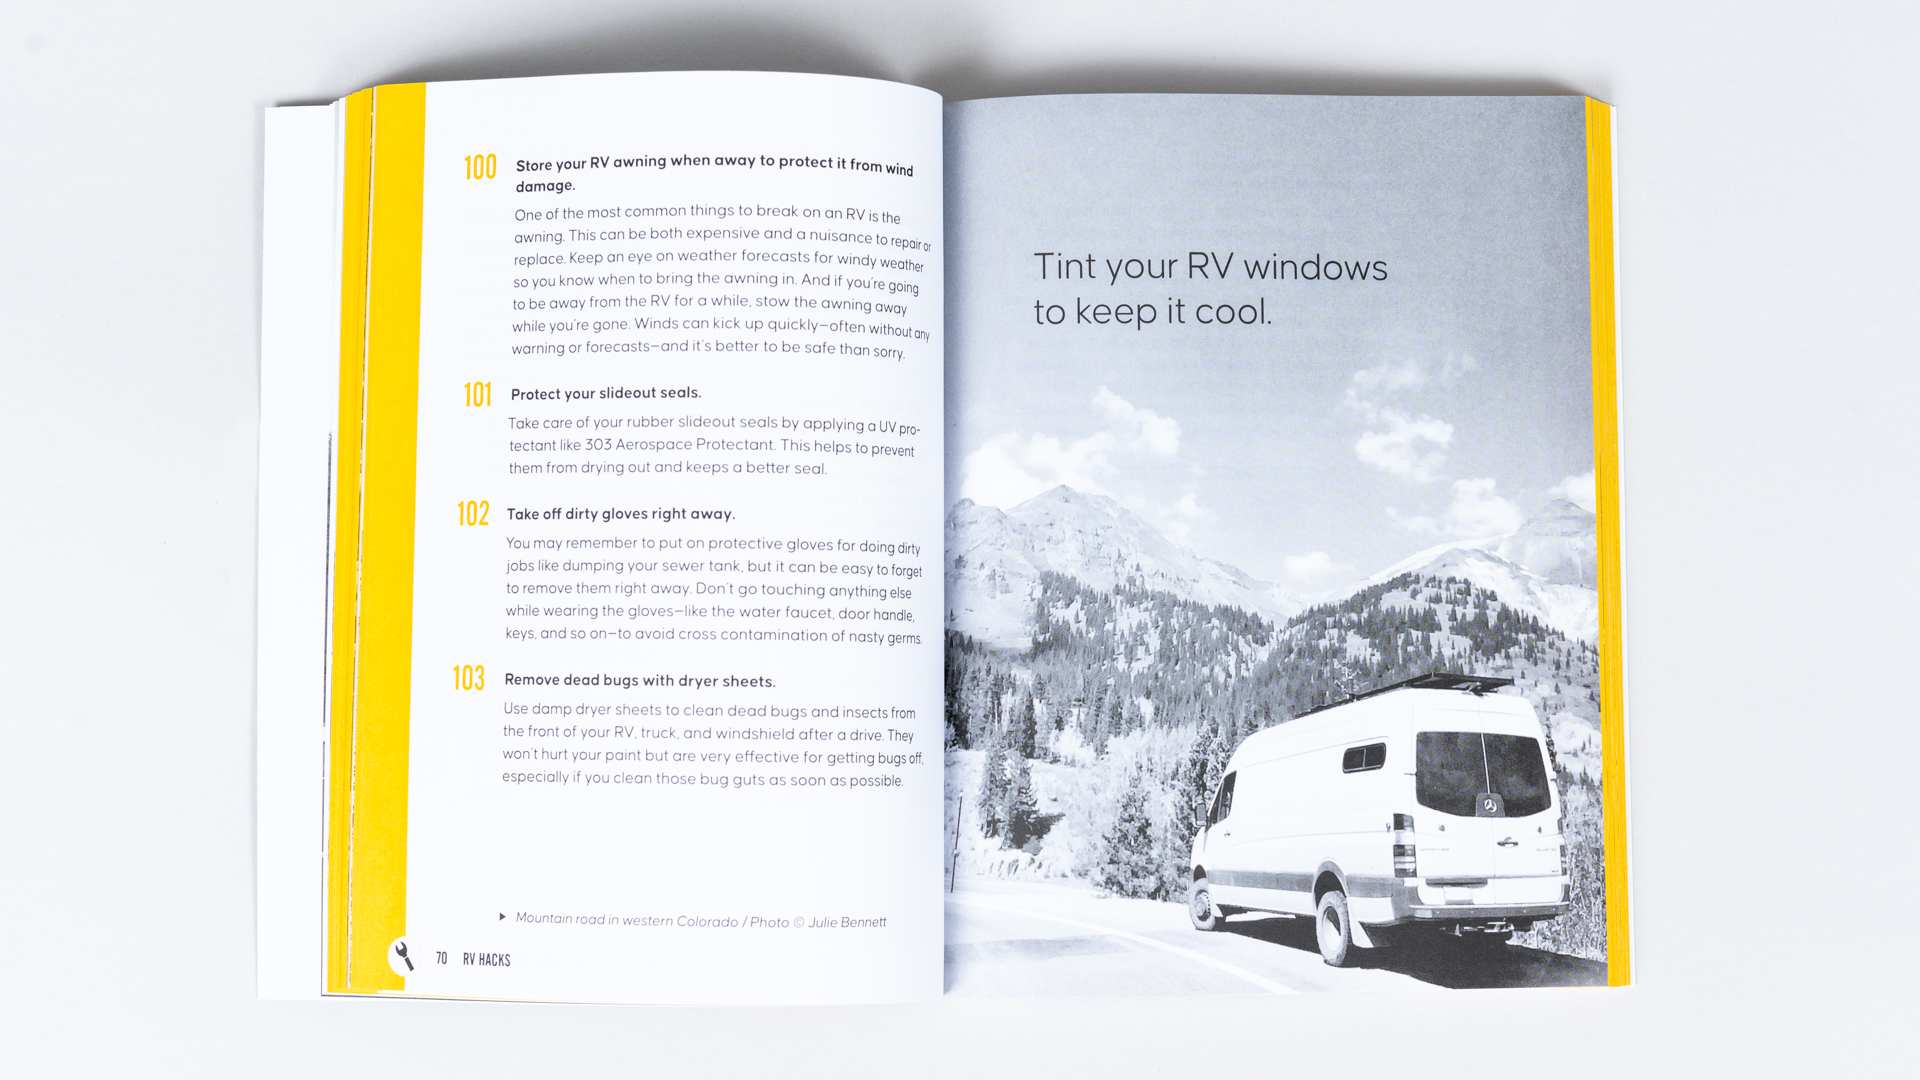 RV Life Hacks Book open to a page about RV windows